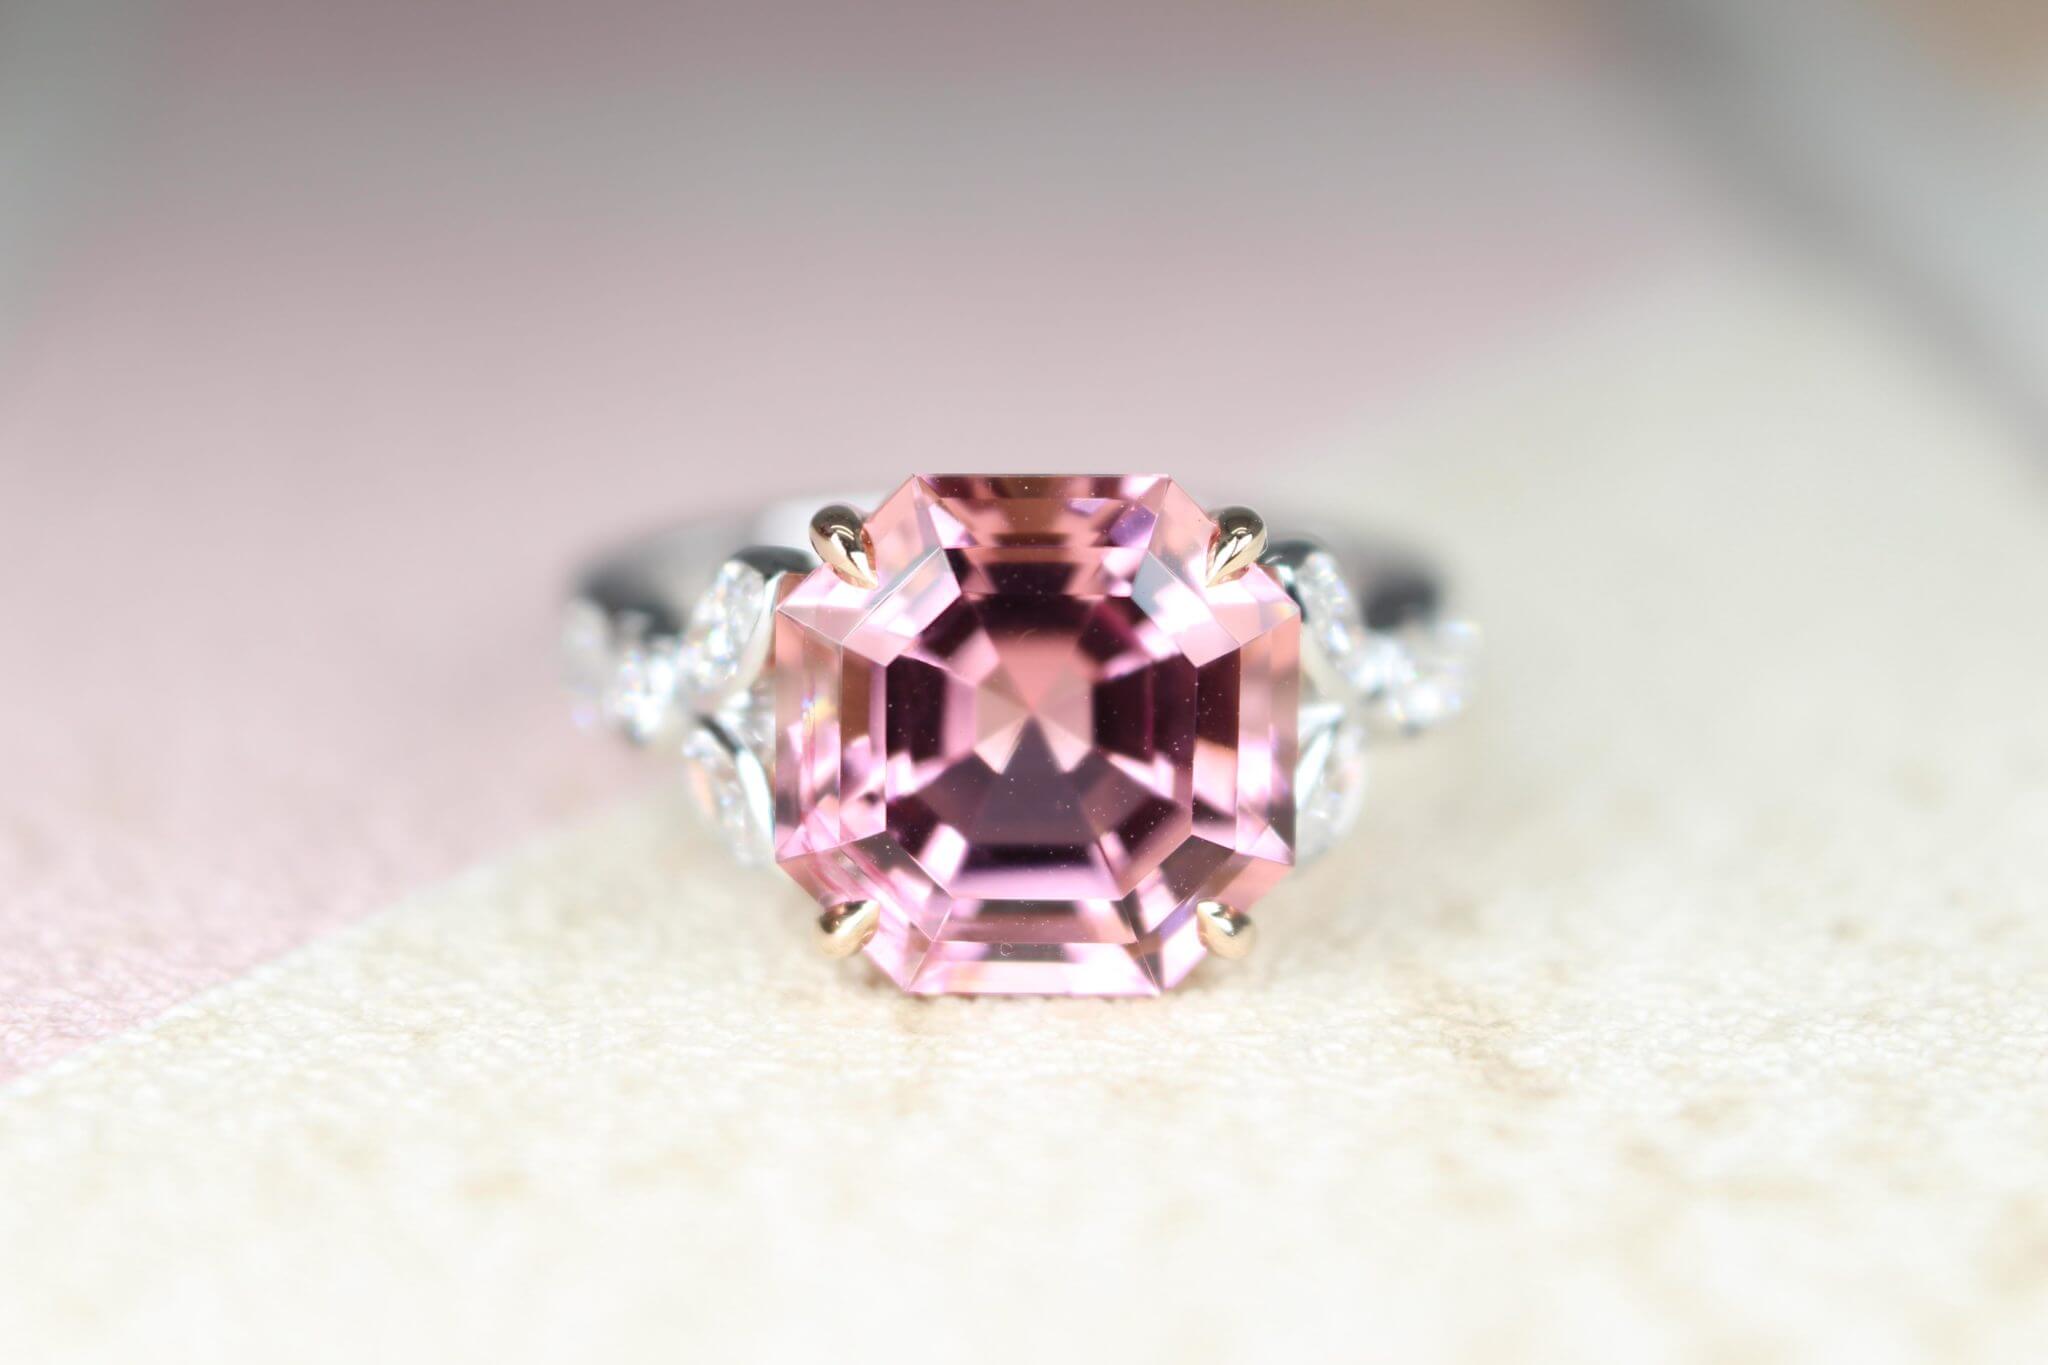 Customised ring custom set in asscher cut shape pink tourmaline gemstone set with rose gold band and round brilliant diamonds | Local Singapore Jeweller in customised jewellery and natural coloured gemstone.